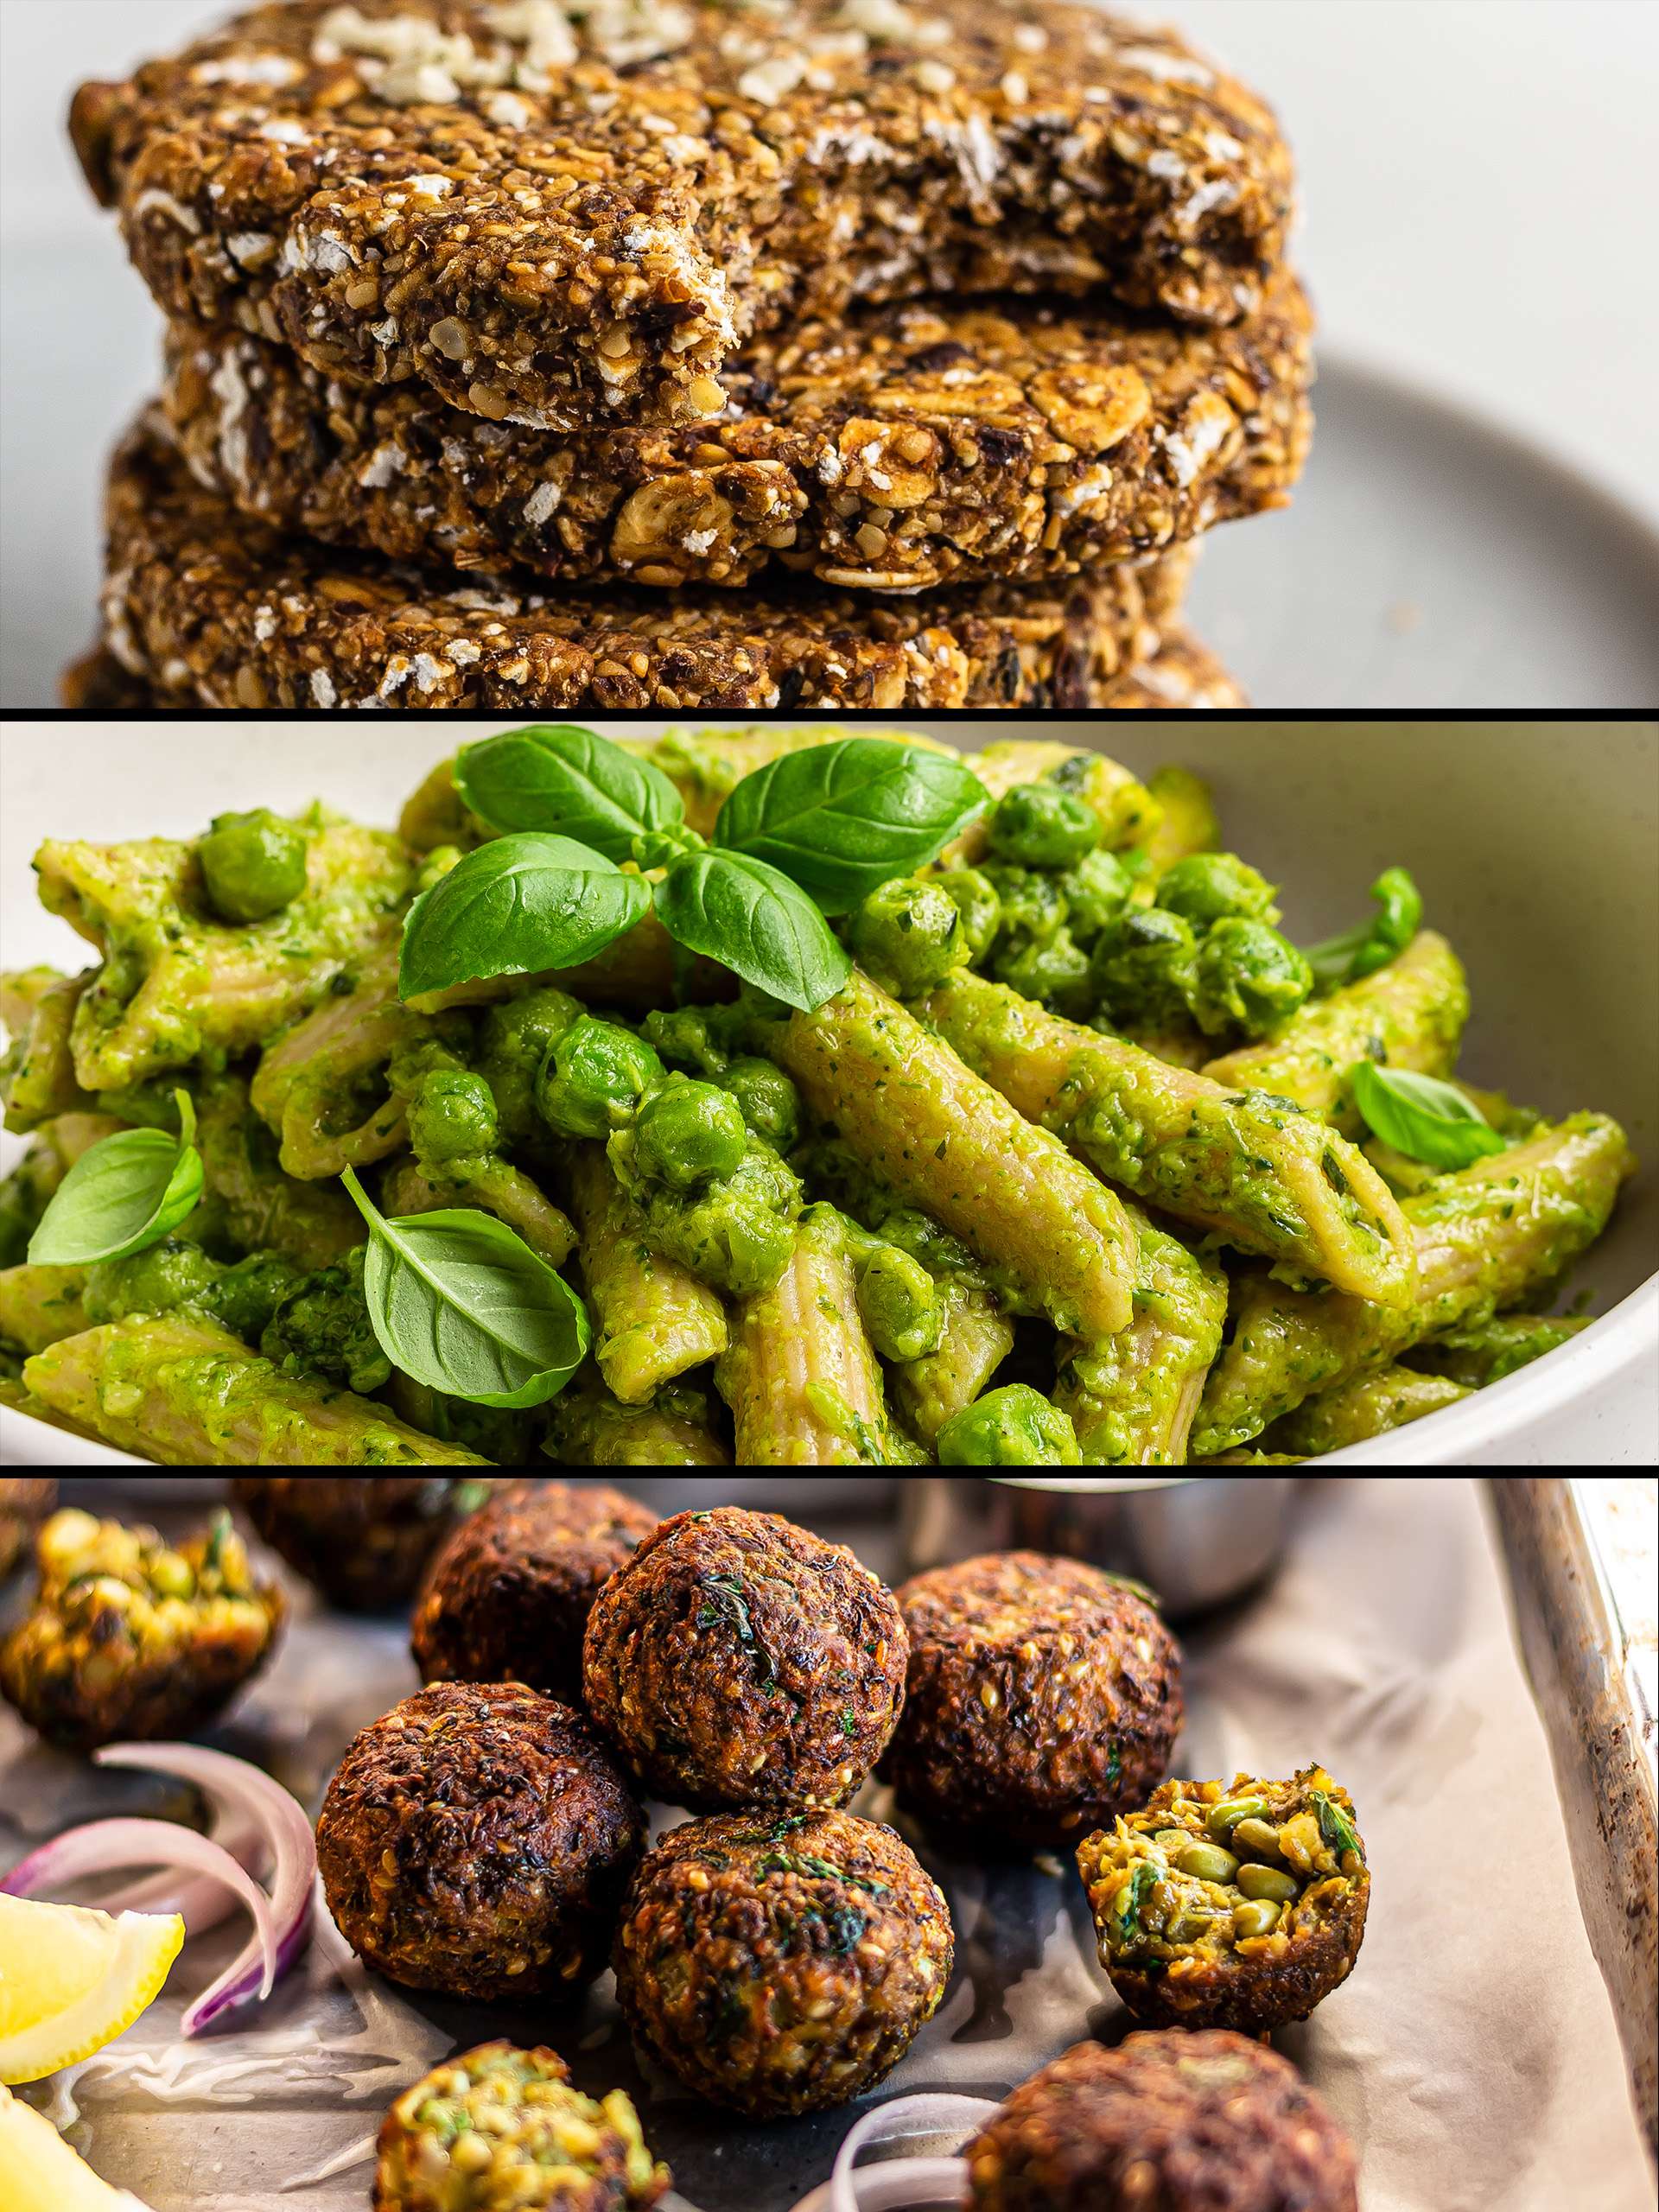 10 High-Fibre, Low-Fat Recipes For Weight-Loss